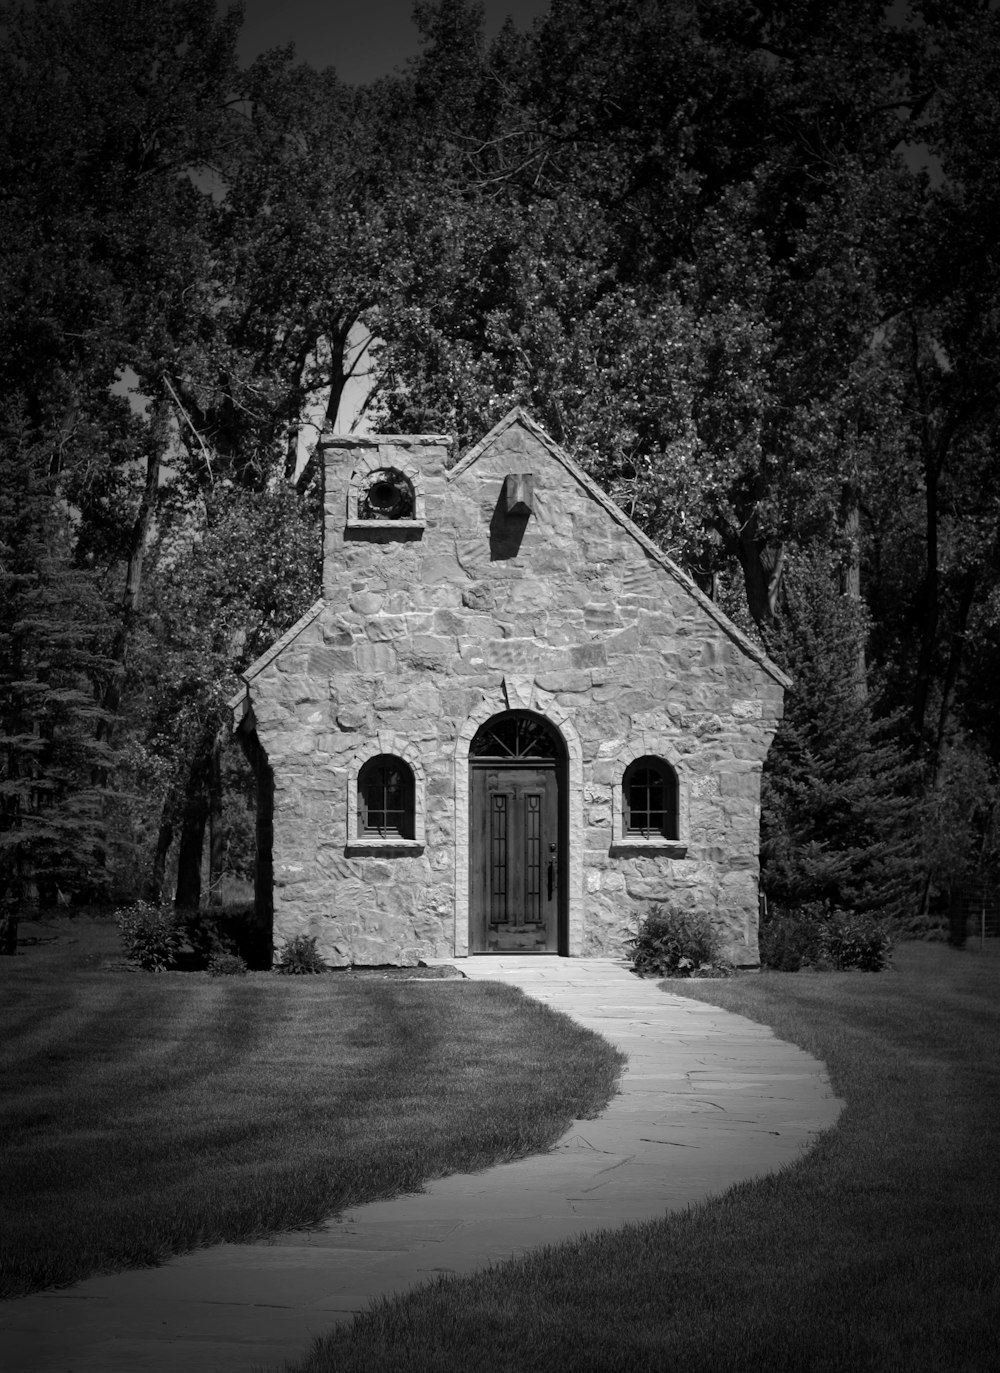 a stone building with a door and windows surrounded by trees